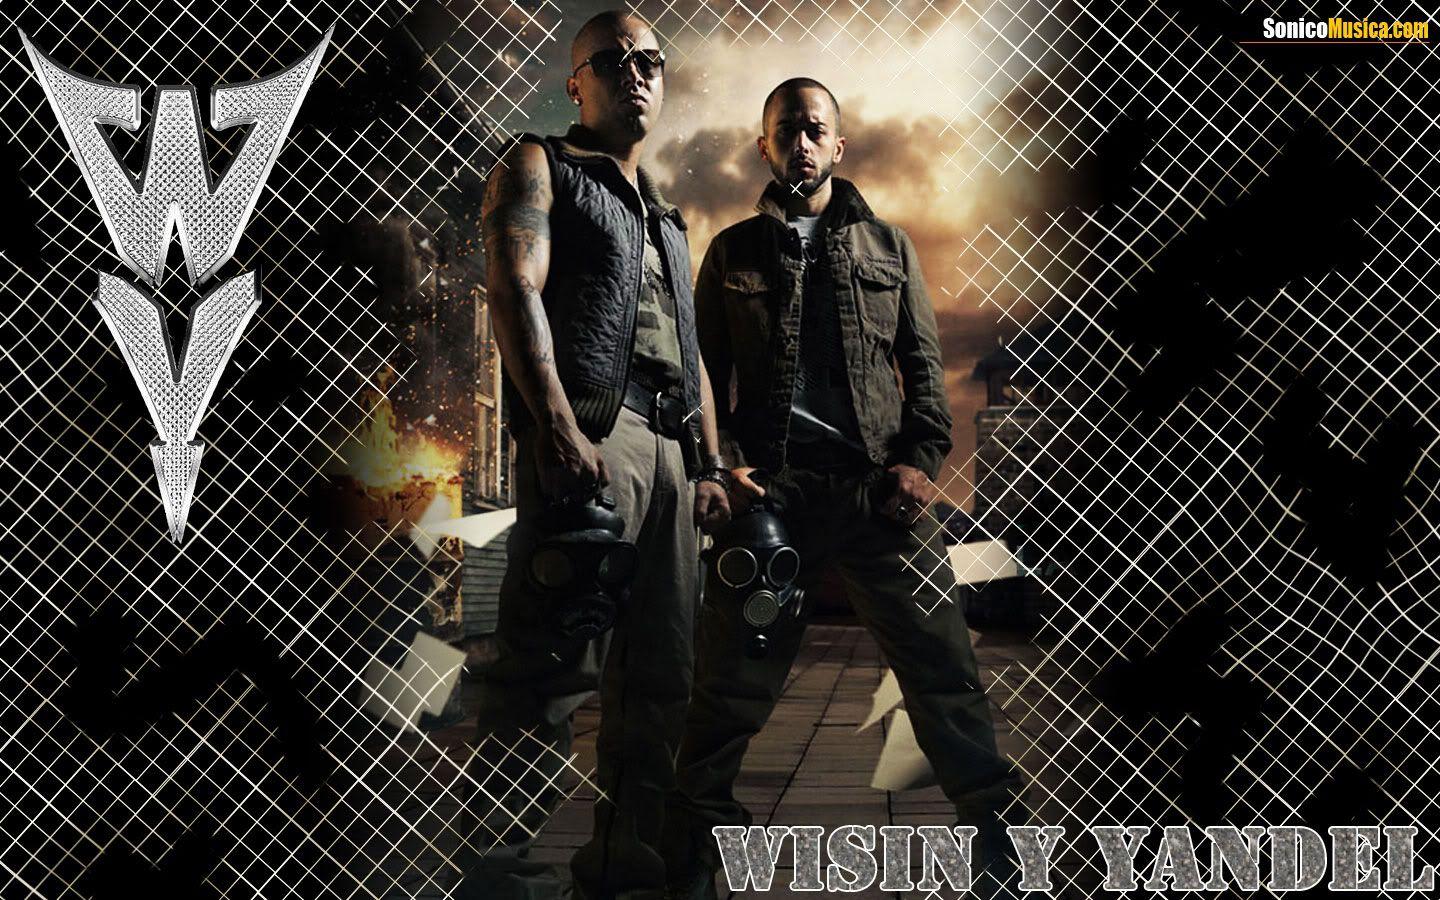 WISIN Y YANDEL graphics and comments